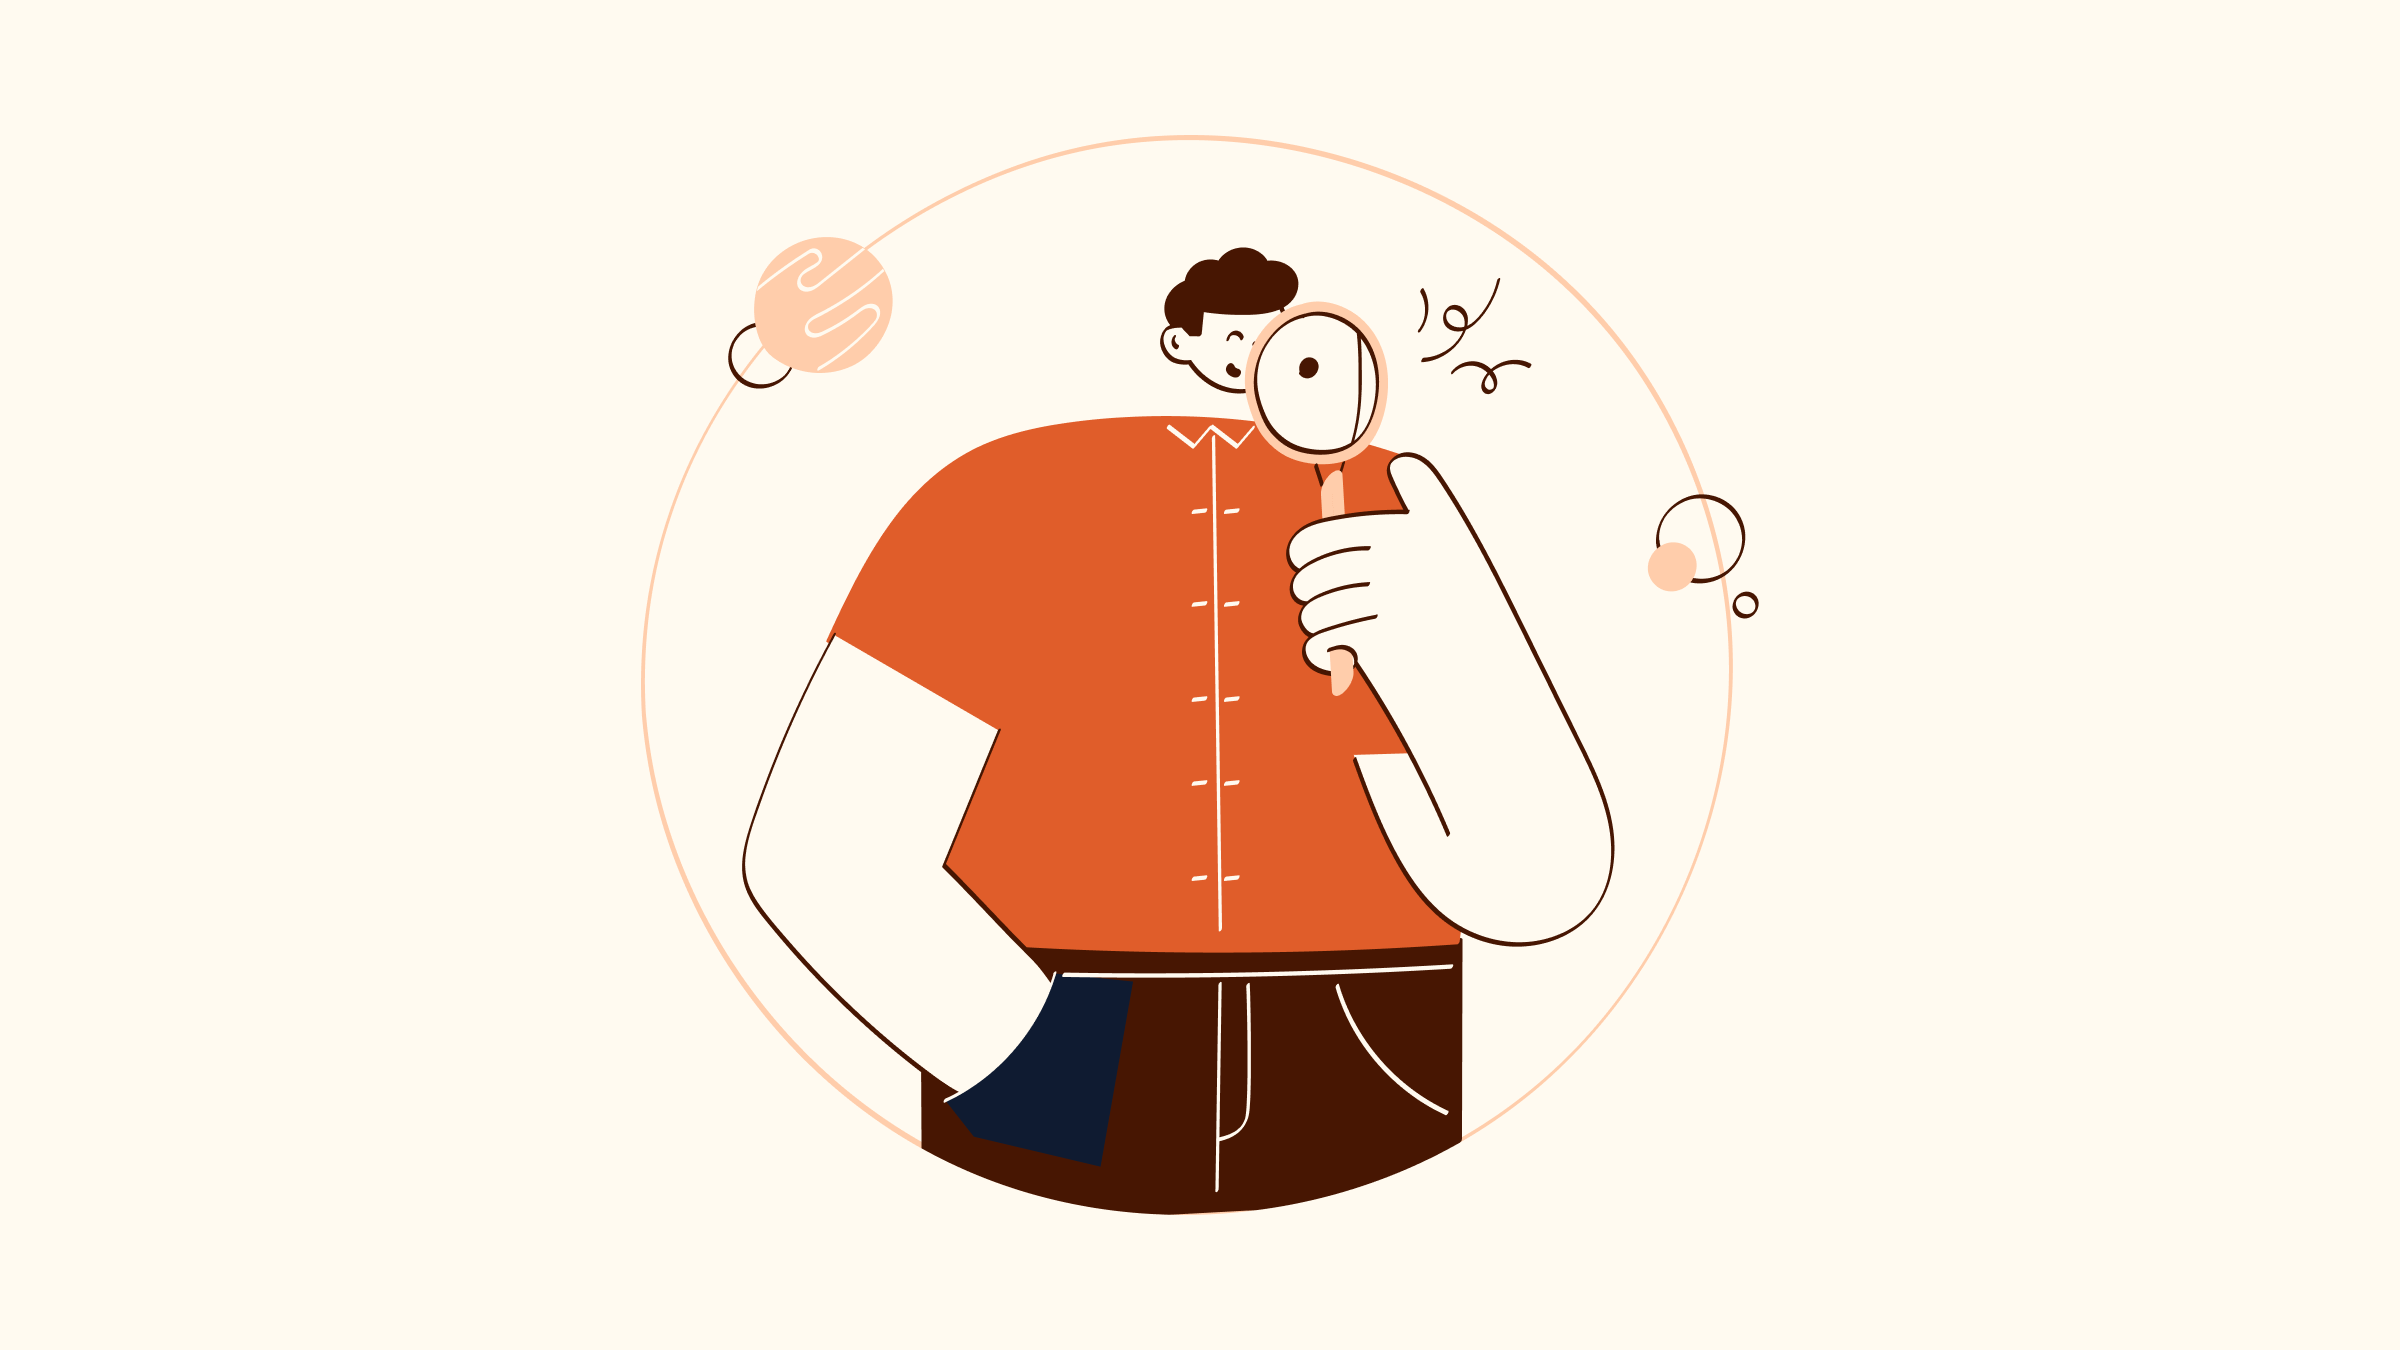 Orange drawing of a person with a magnifying glass